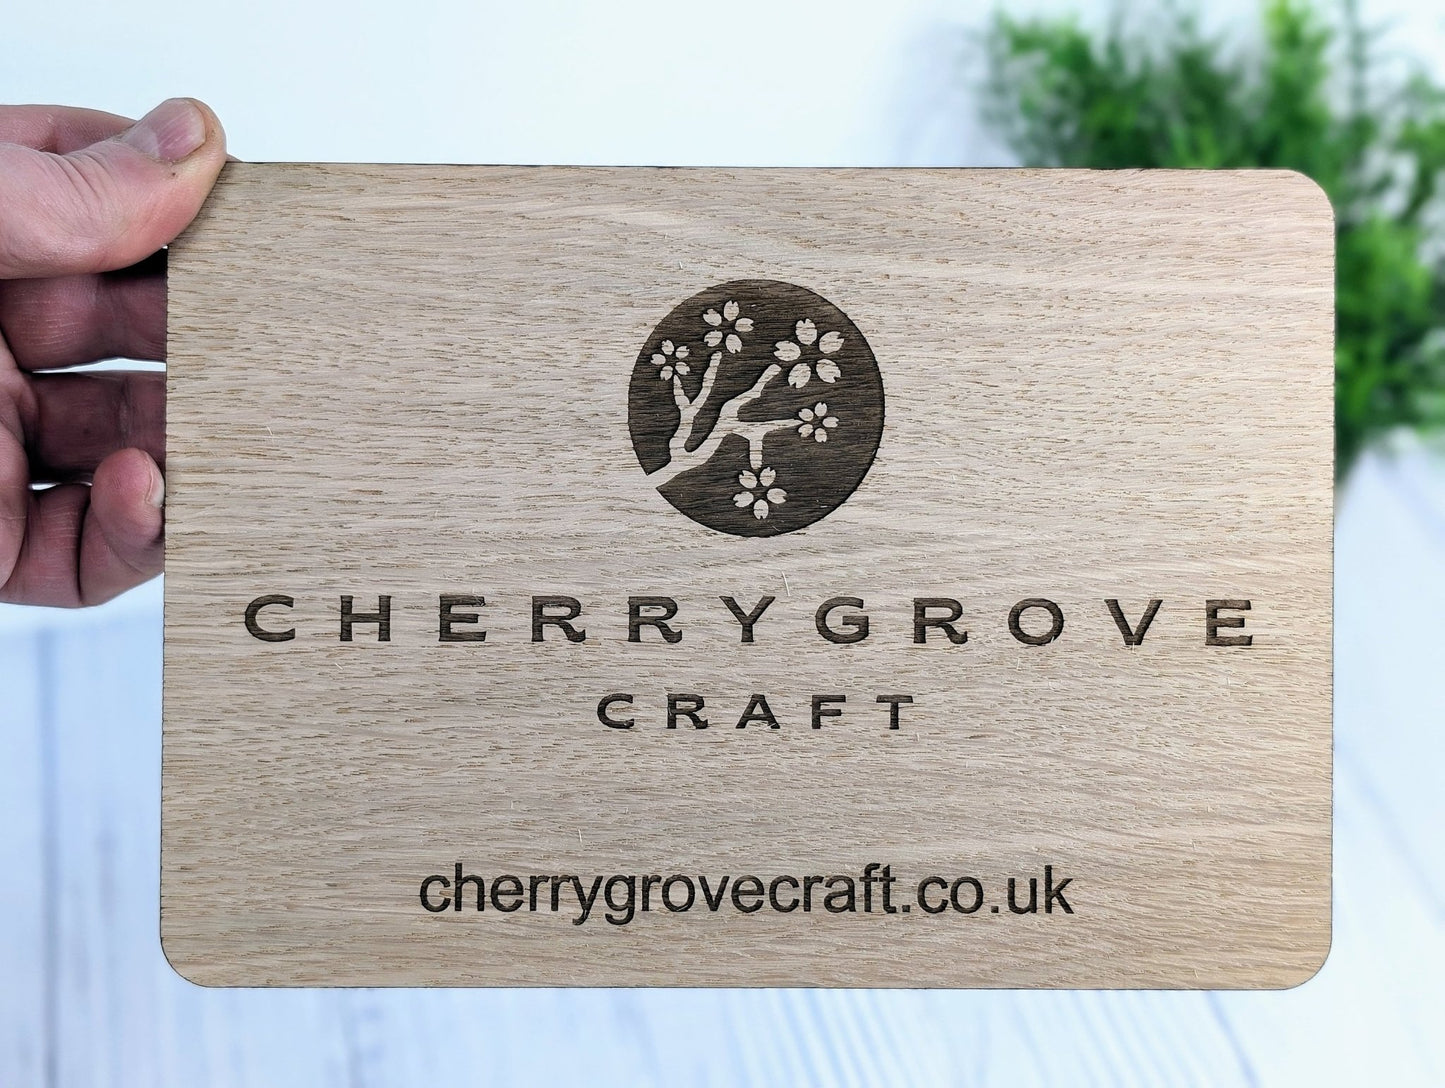 Custom Logo Display Wooden Sign with Optional Stand - CherryGroveCraft